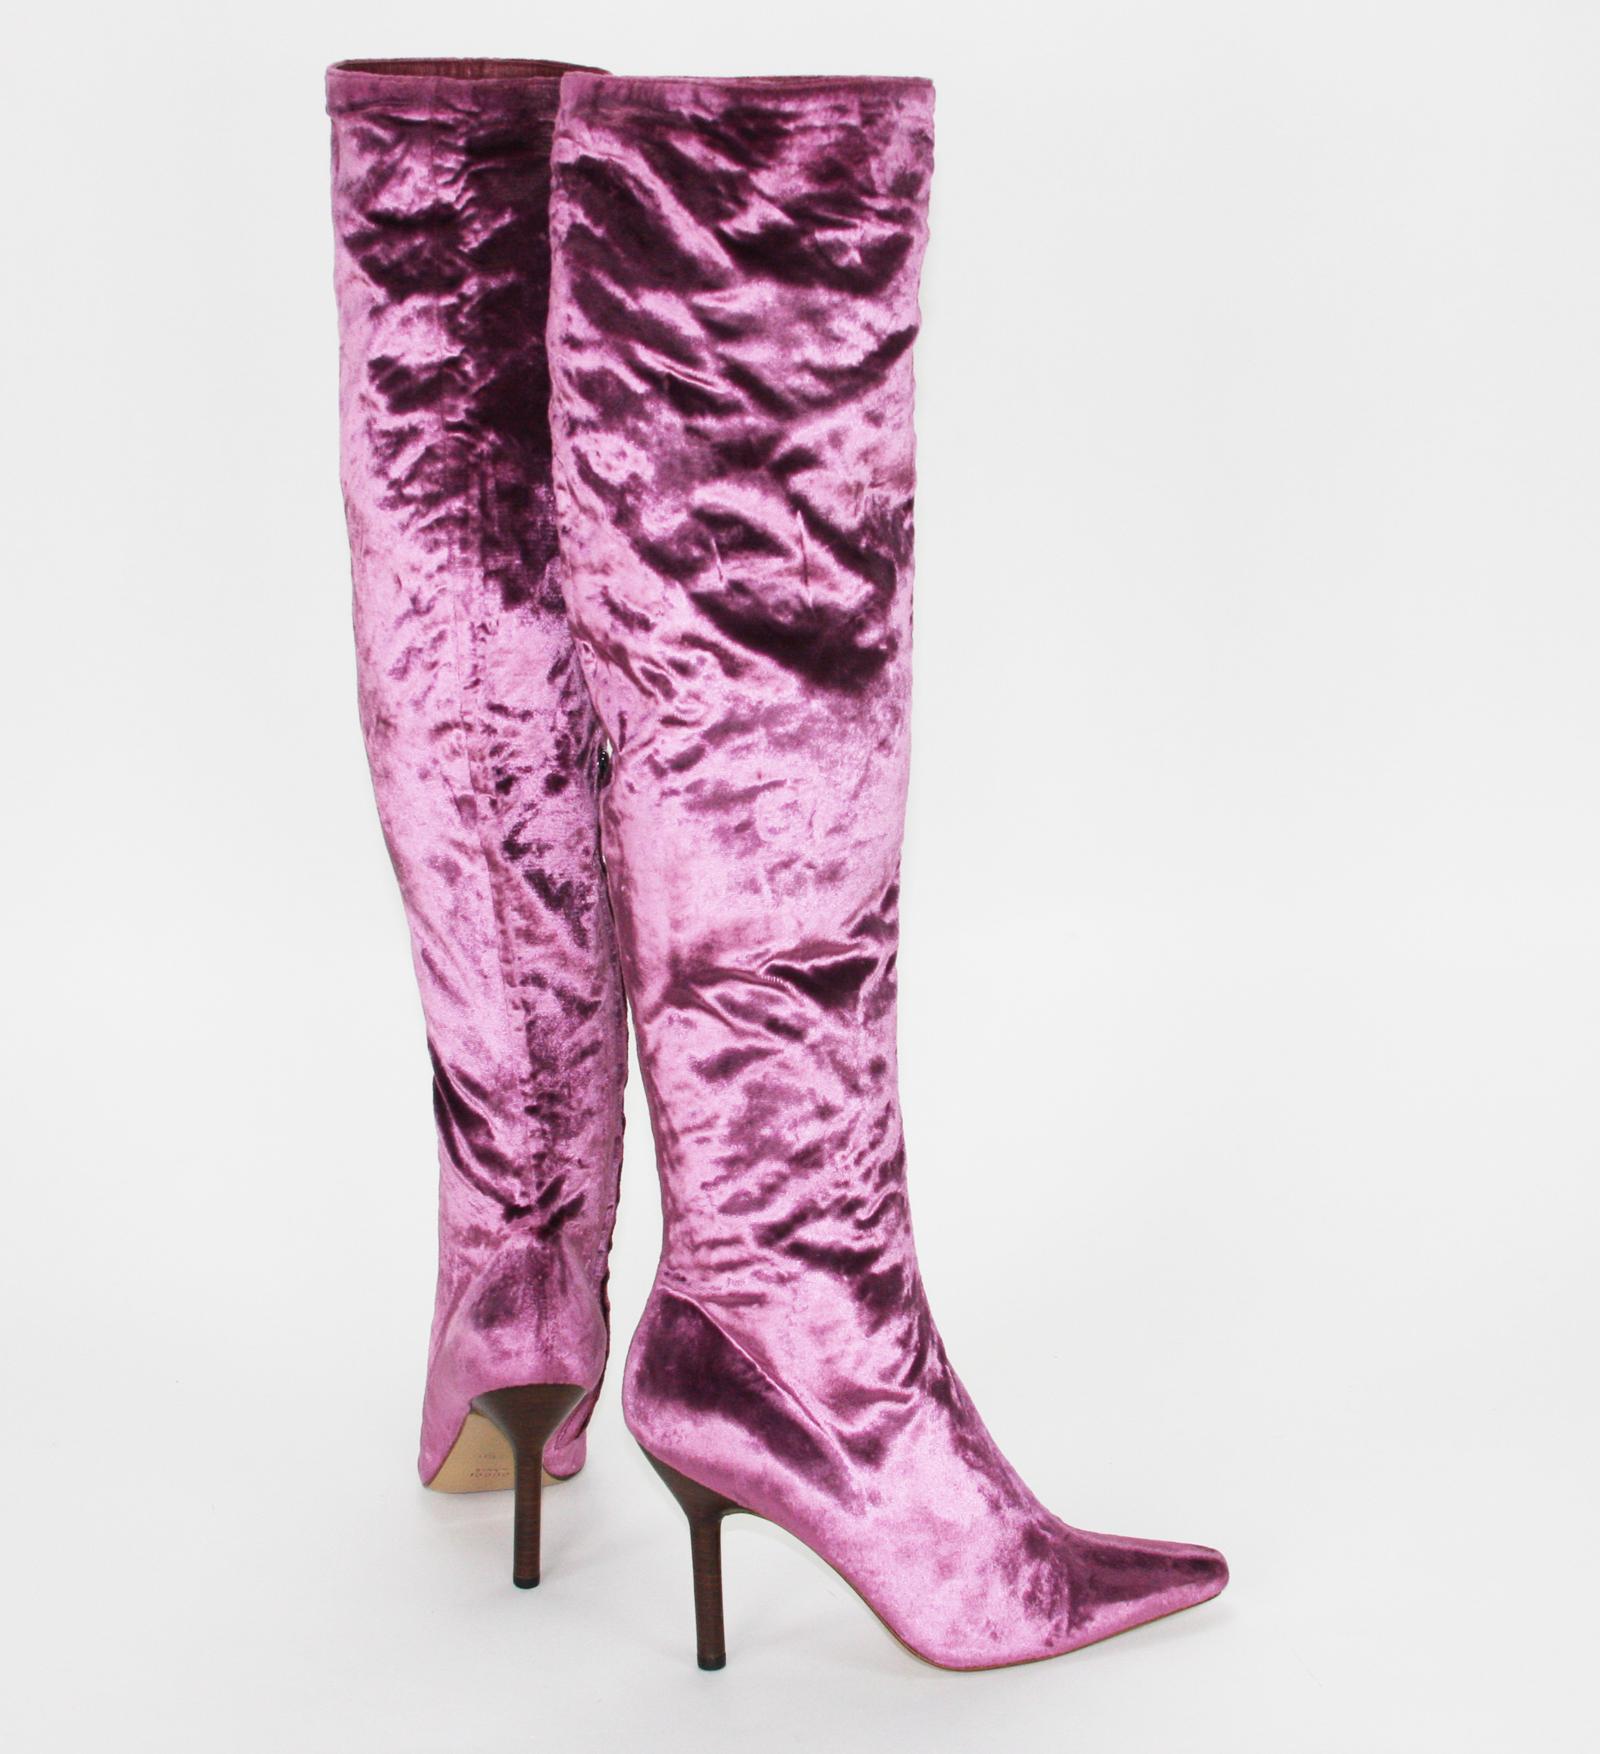 Tom Ford for Gucci Pink Velvet Over the Knee Boots
Vintage F/W 1999 Collection
Designer size 7 1/2 B
Sexy and Elegant Style, Rare Pink Color Velvet, Partly Zip Closure, Pointed Toe-Line, Fully Lined, Leather Sole.
Measurements: Total Height from the